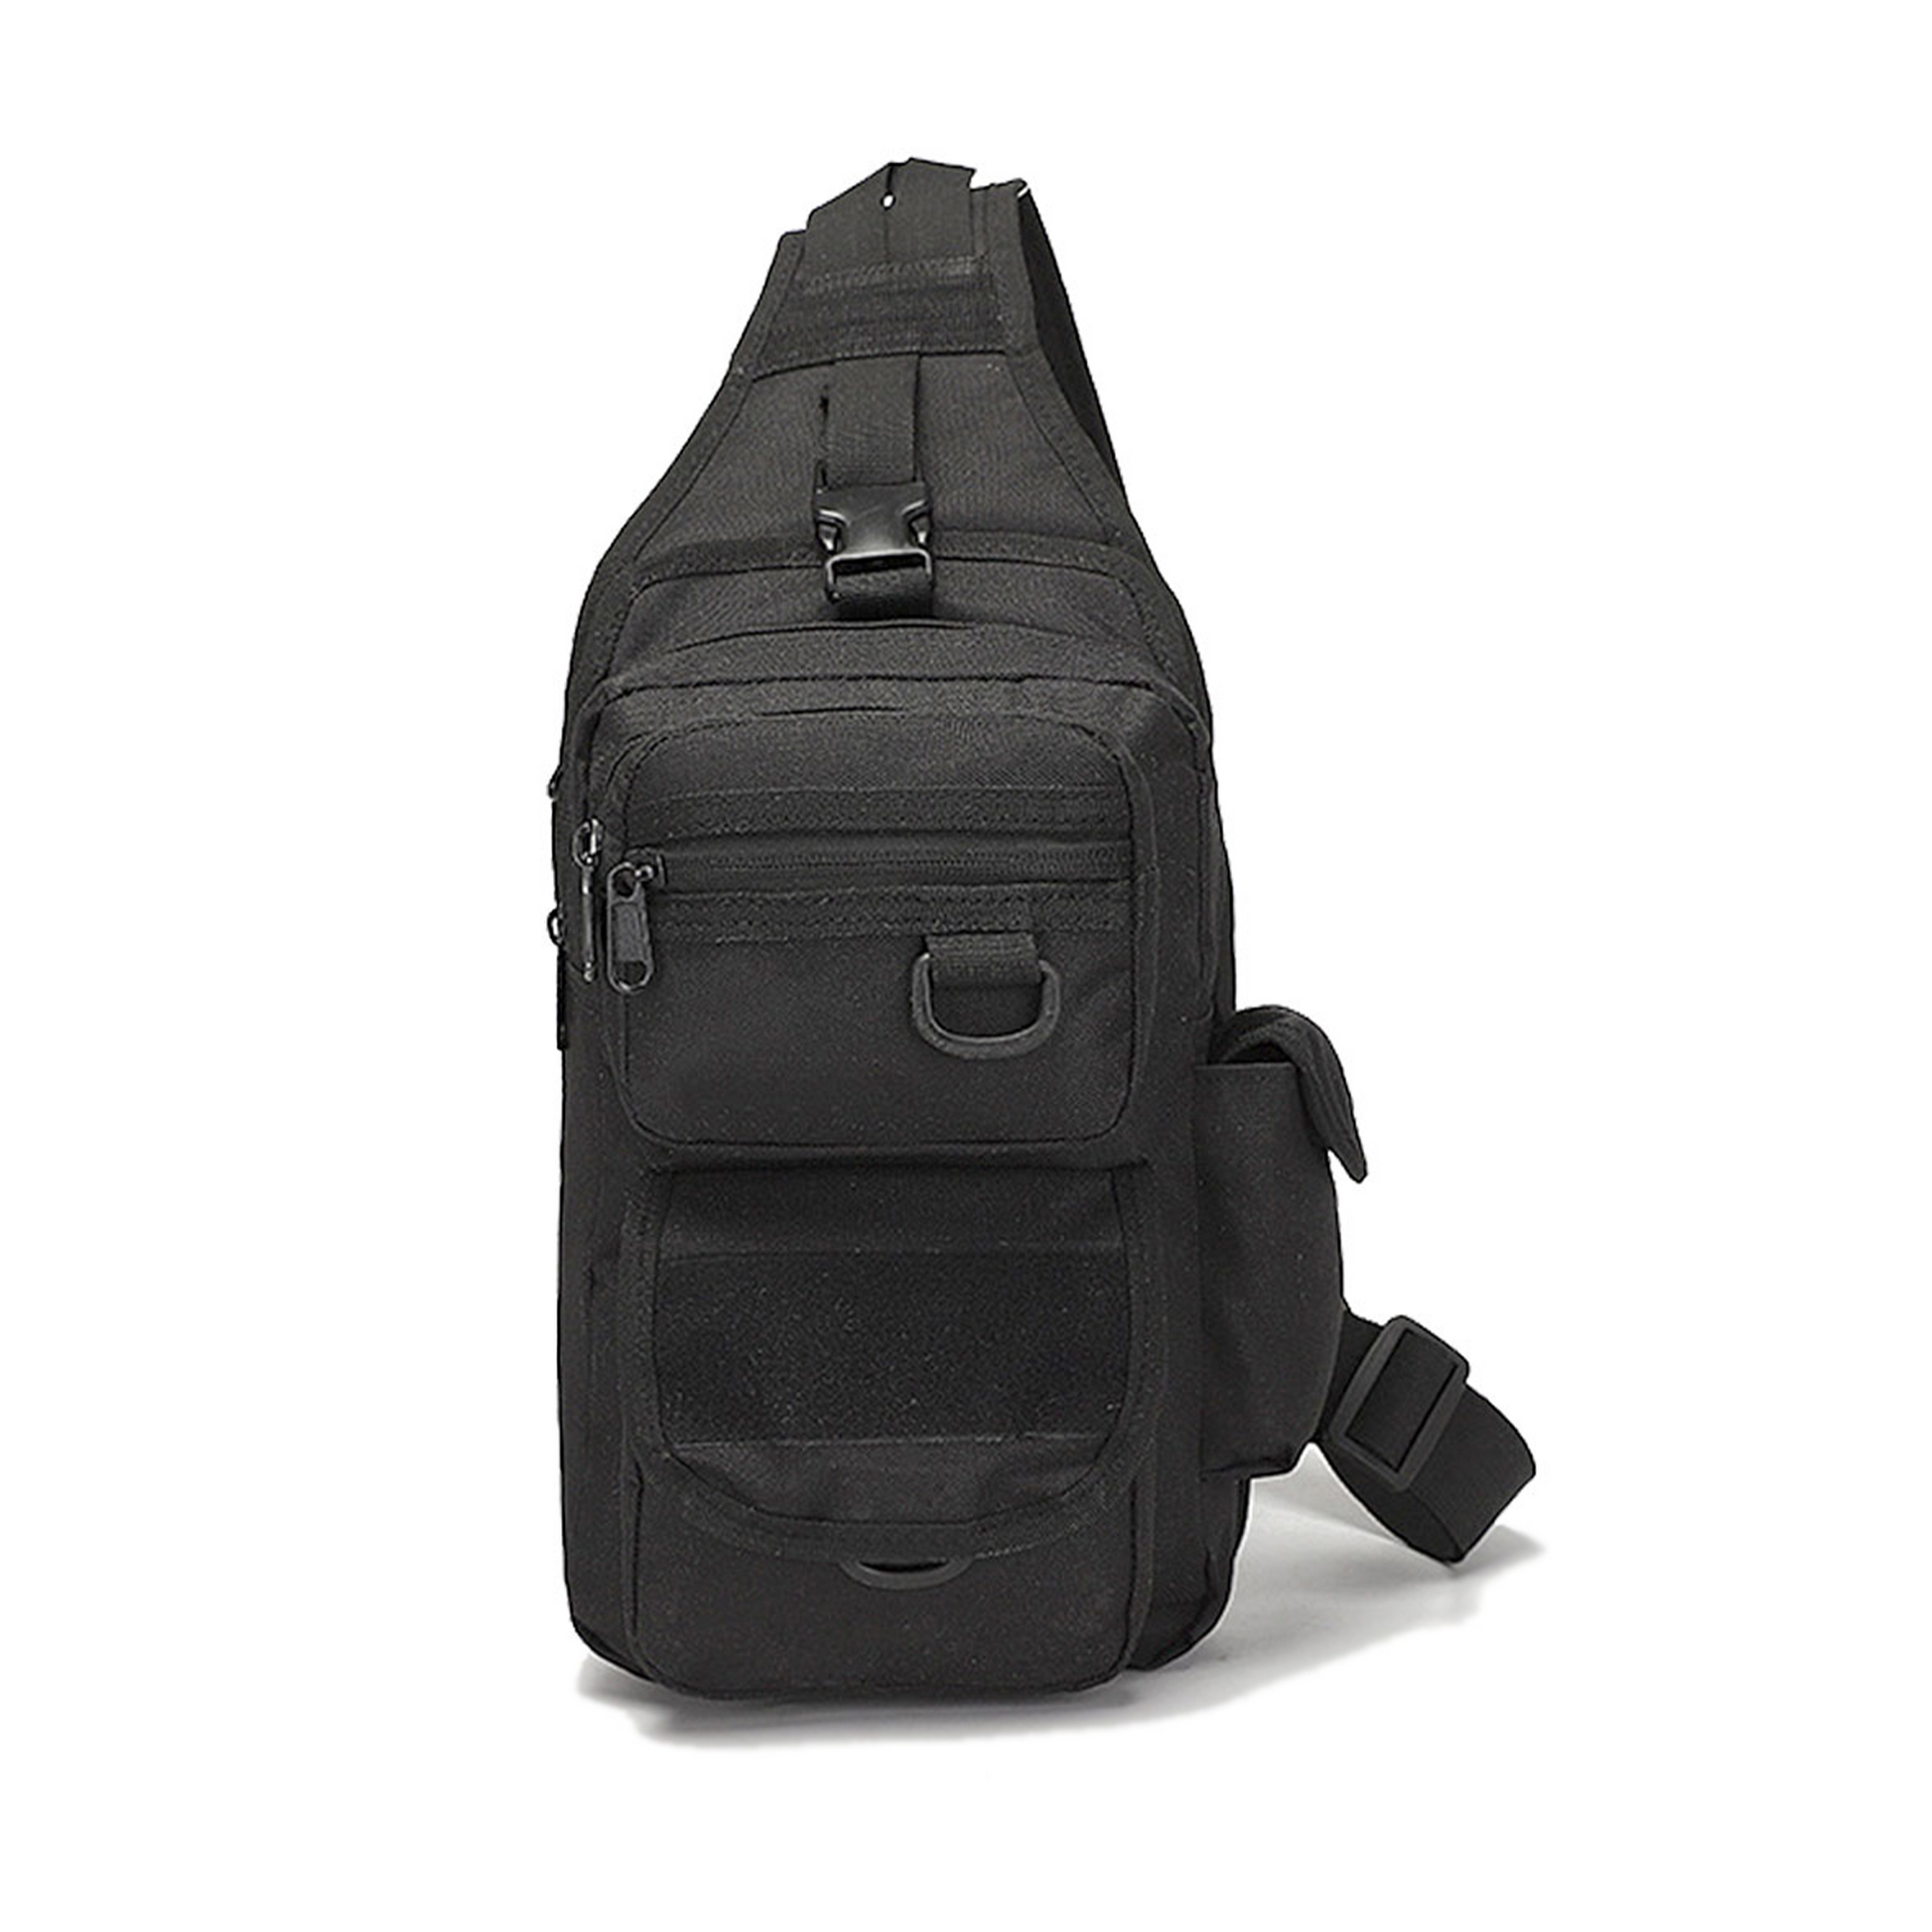 Every Day Carry Bag – IJ Tactical